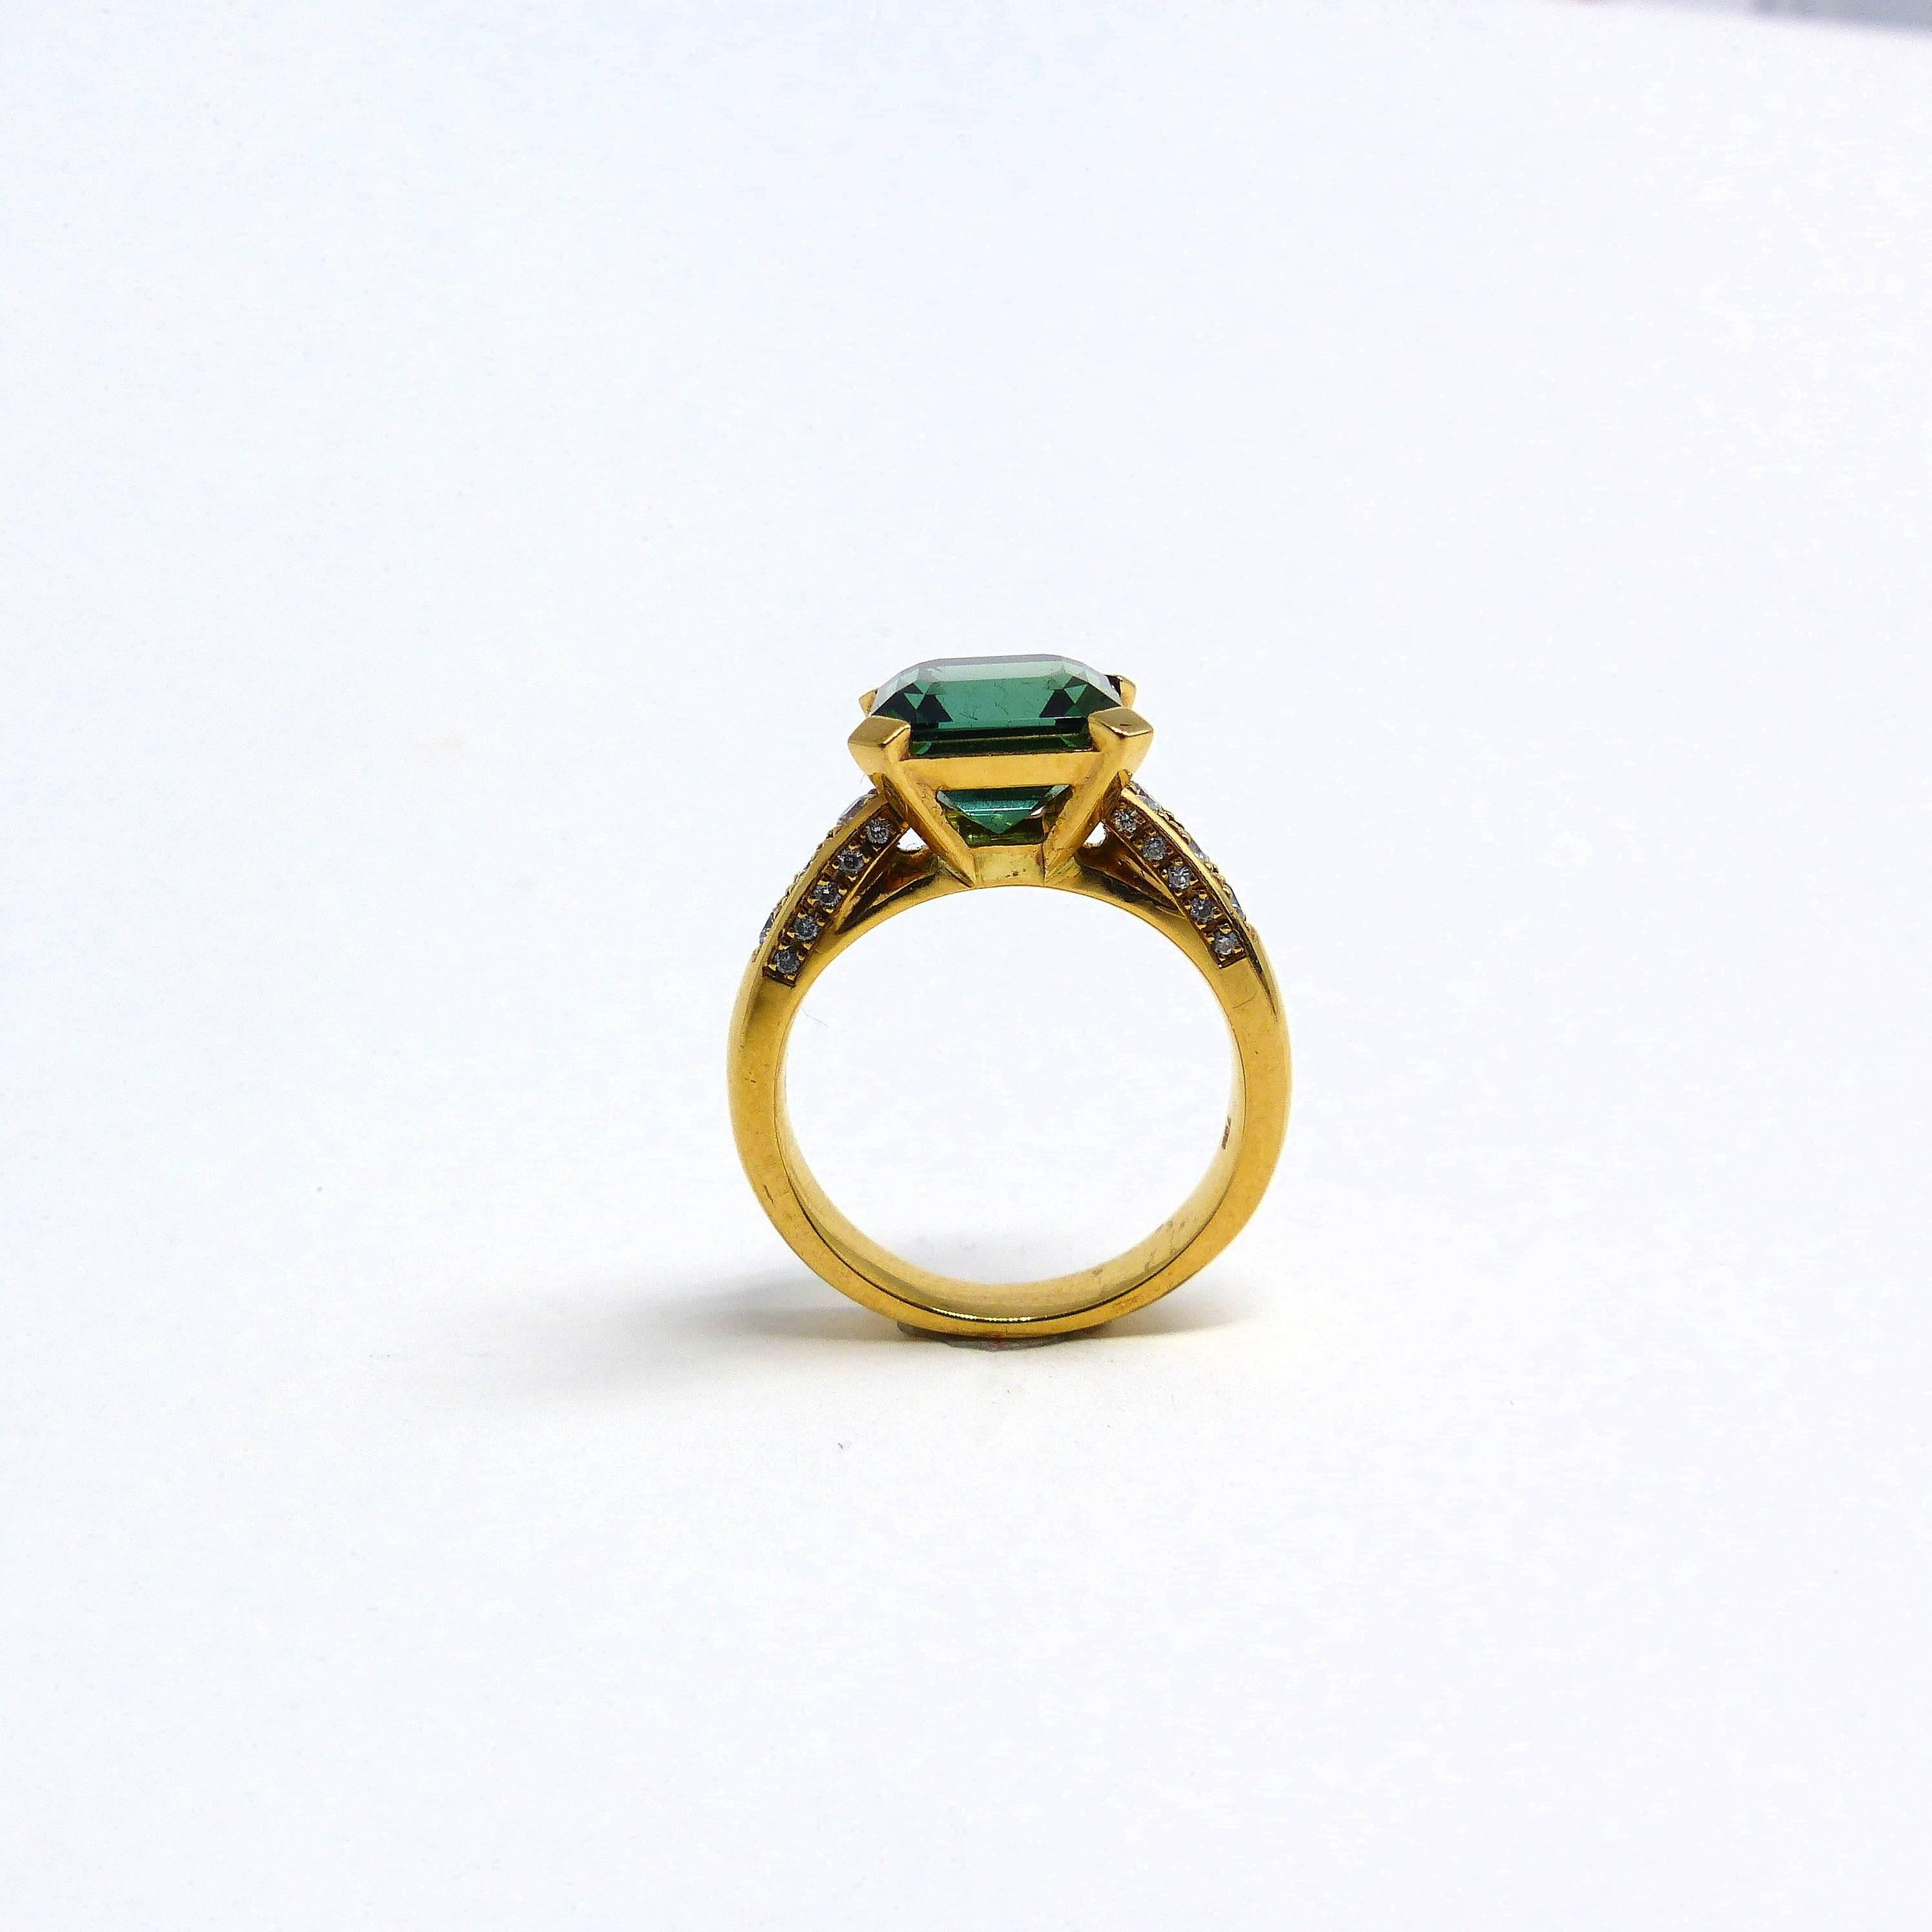 Emerald Cut Ring in Rose Gold with 1 Tourmaline and Diamonds. For Sale